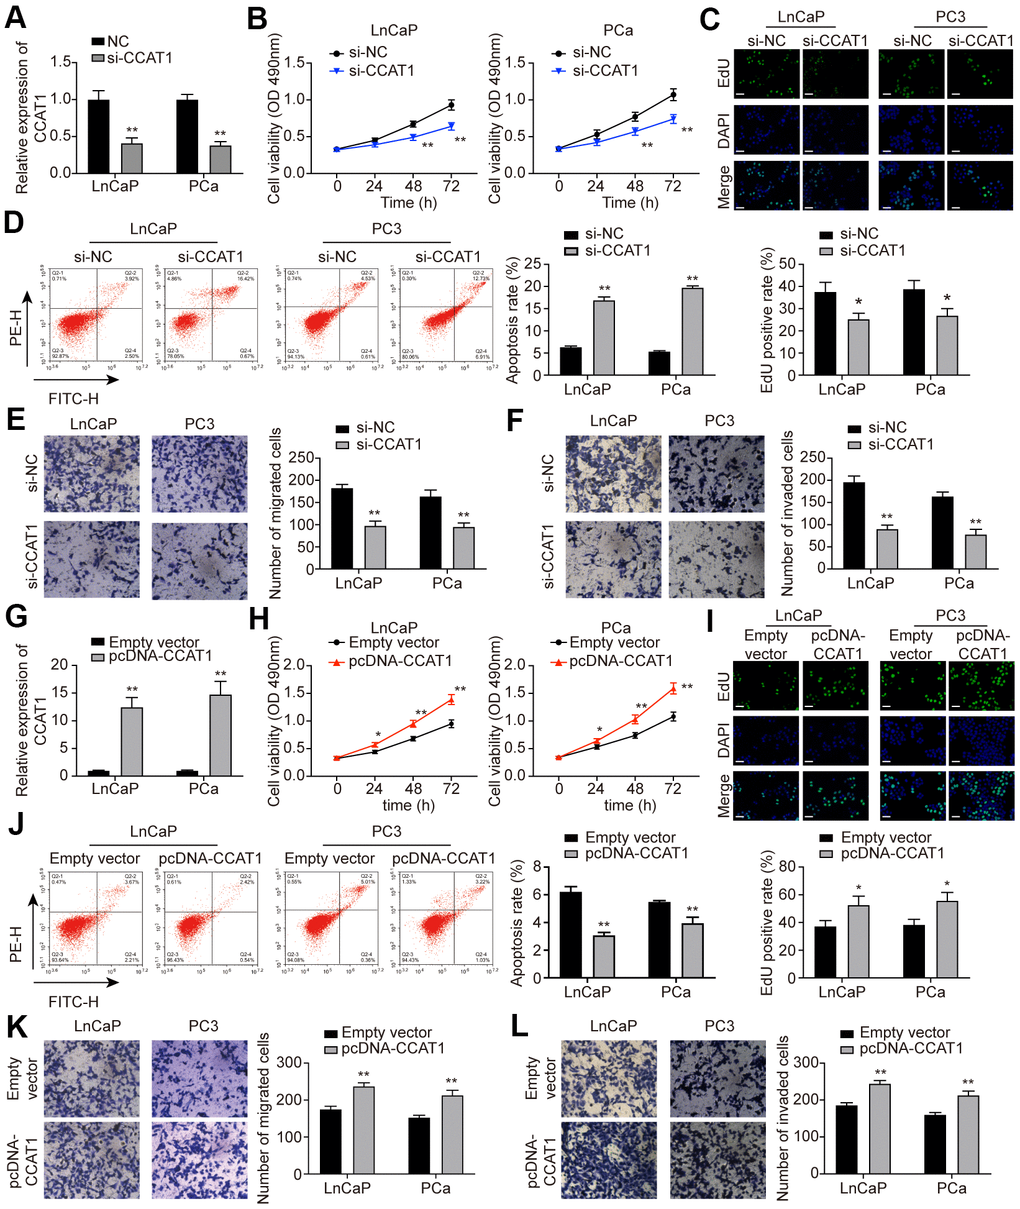 CCAT1 promoted cell proliferation, migration, and invasion in PCa cells. (A) CCAT1 expression in LnCaP and PC3 cell lines. Transfection of si-CCAT1 successfully decreased CCAT1 expression in PCa cells. (B) Cell viability of LnCaP and PC3 cells treated with si-NC or si-CCAT1. CCAT1 inhibition suppressed PCa cells viability. (C) EdU staining in LnCaP and PC3 cells treated with si-NC or si-CCAT1. CCAT1 inhibition suppressed cell proliferation in PCa cells. (D) Cell apoptosis of LnCaP and PC3 cells by flow cytometry detection. PCa cells with lower CCAT1 expression had higher apoptosis rate. (E, F) Cell migration and invasion of LnCaP and PC3 cells in Transwell assays. With si-CCAT1 transfection, cell migration and invasion in PCa cells were both blocked. (G) CCAT1 expression in LnCaP and PC3 cell lines. Transfection of pcDNA-CCAT1 successfully increased CCAT1 expression in PCa cells. (H) Cell viability of LnCaP and PC3 cells treated with empty vector or pcDNA-CCAT1. CCAT1 overexpression enhanced PCa cell viability. (I) EdU staining in LnCaP and PC3 cells treated with empty vector or pcDNA-CCAT1. CCAT1 overexpression promoted cell proliferation in PCa cells. Scale bar: 50 μm. (J) Cell apoptosis of LnCaP and PC3 cells by flow cytometry detection. PCa cells with higher CCAT1 expression level indicated lower apoptosis rate. (K, L) Cell migration and invasion of LnCaP and PC3 cells in Transwell assays. With pcDNA-CCAT1 transfection, cell migration and invasion in PCa cells were both enhanced. *P P 